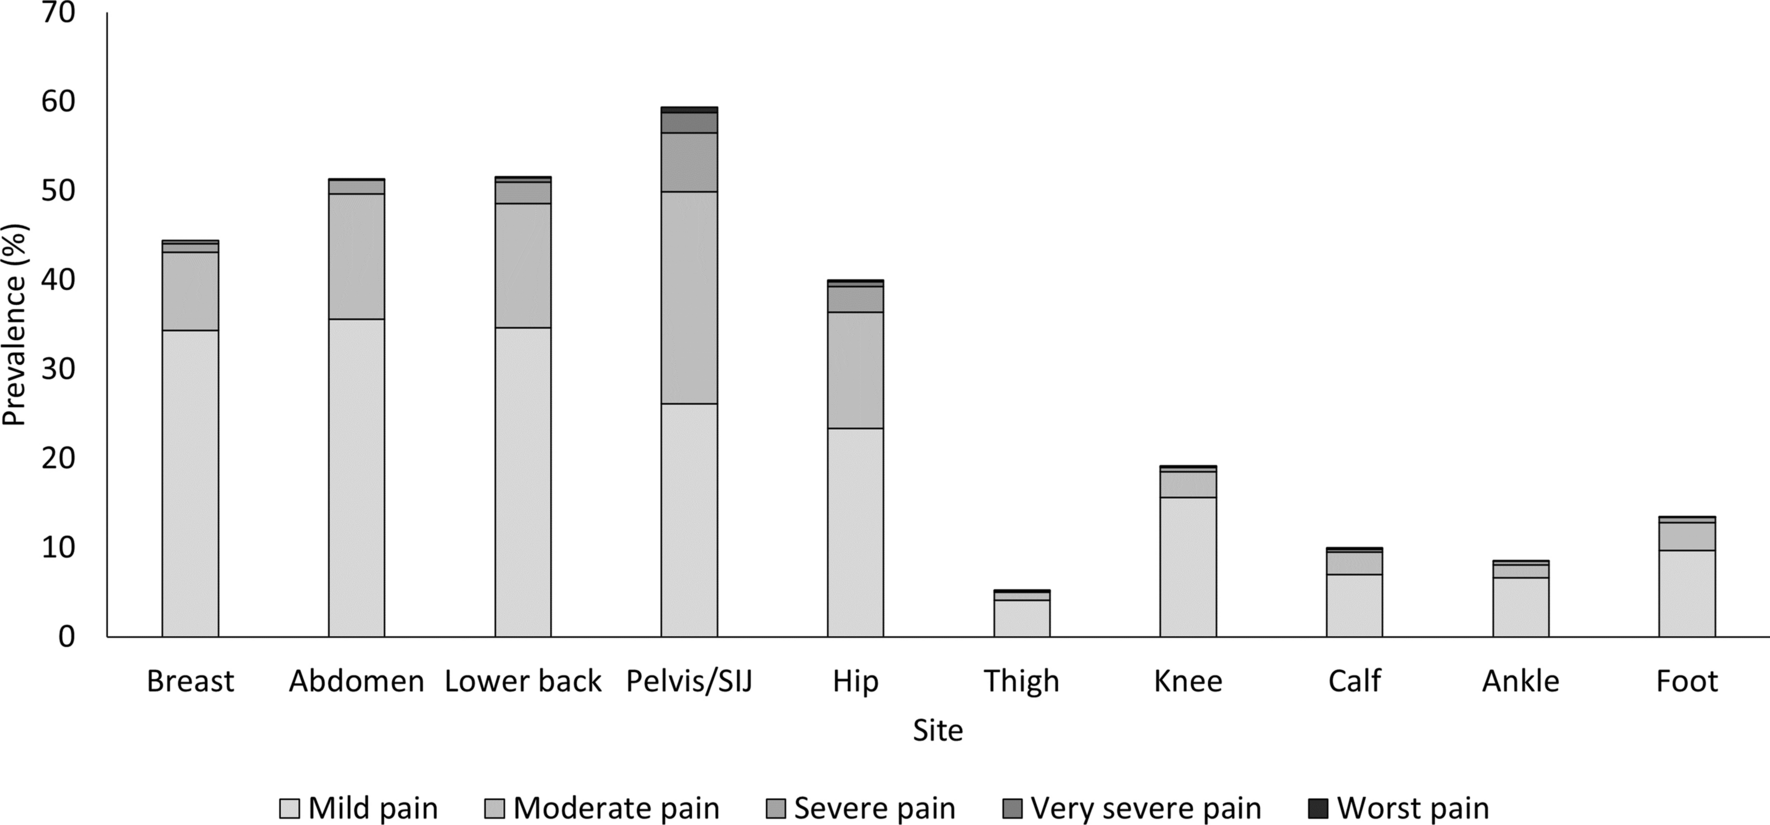 Prevalence and Risk Factors for Musculoskeletal Pain when Running During Pregnancy: A Survey of 3102 Women